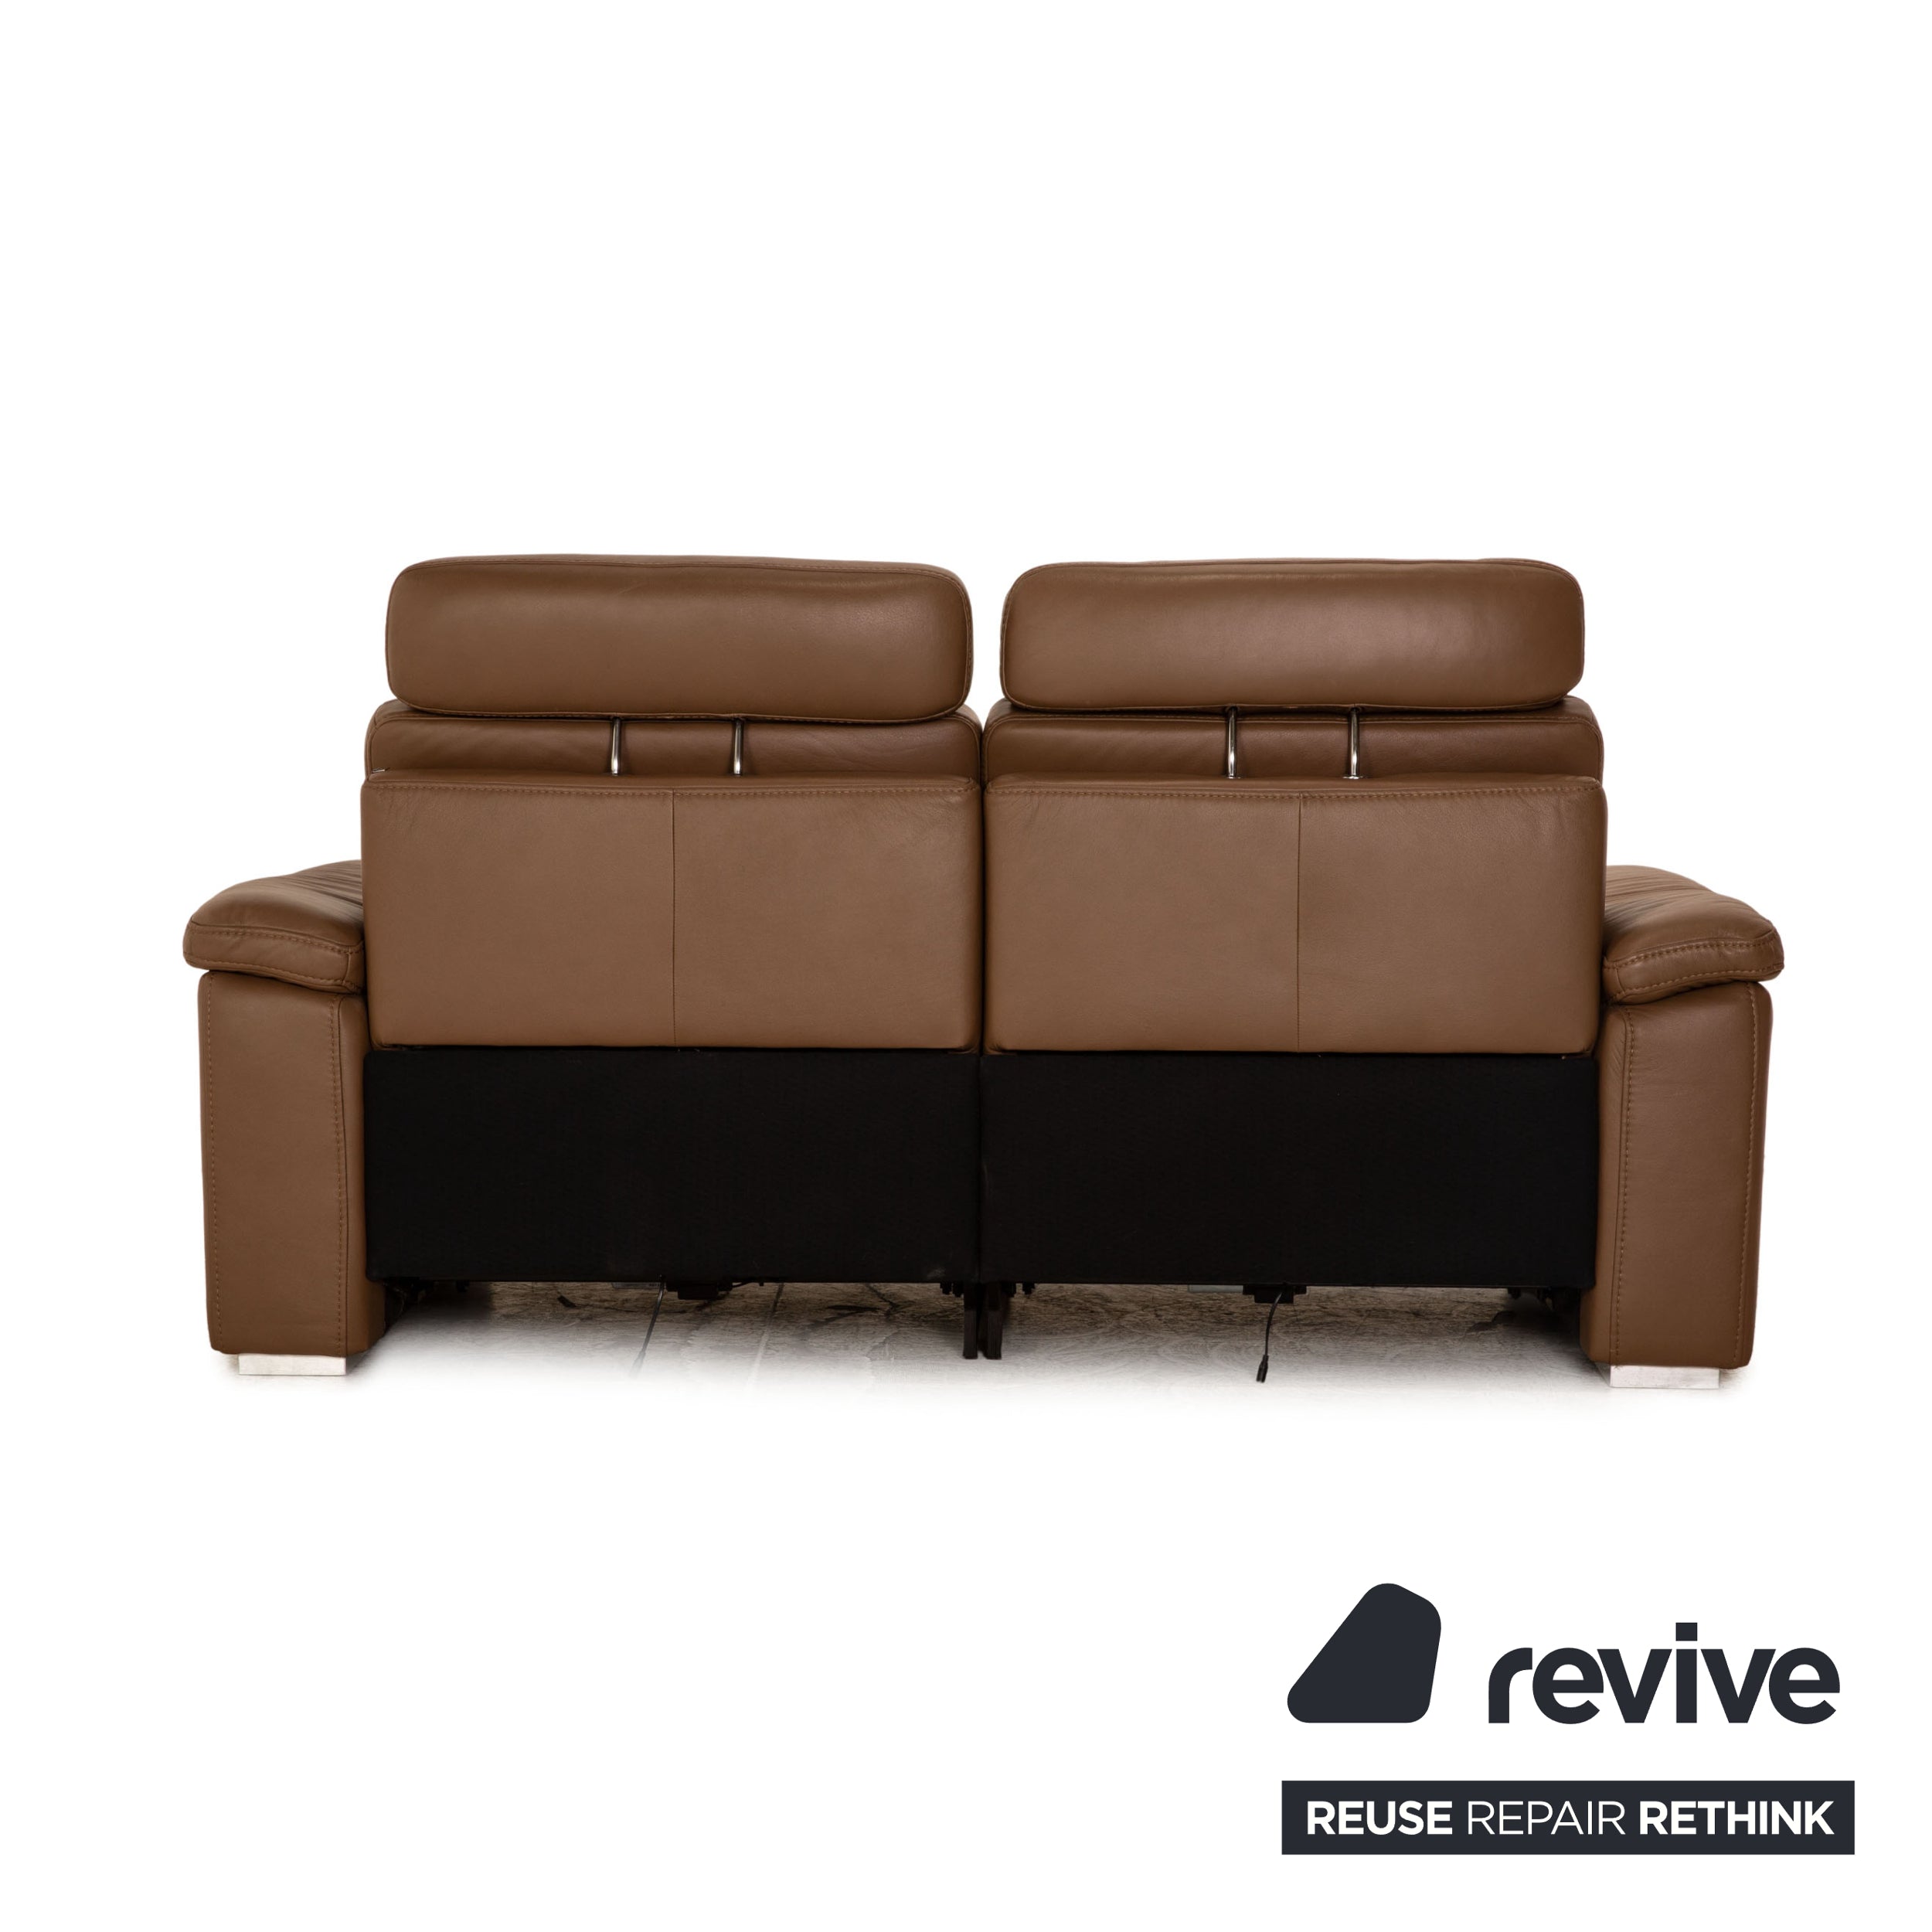 Mondo Maestra leather two seater brown sofa couch electric function